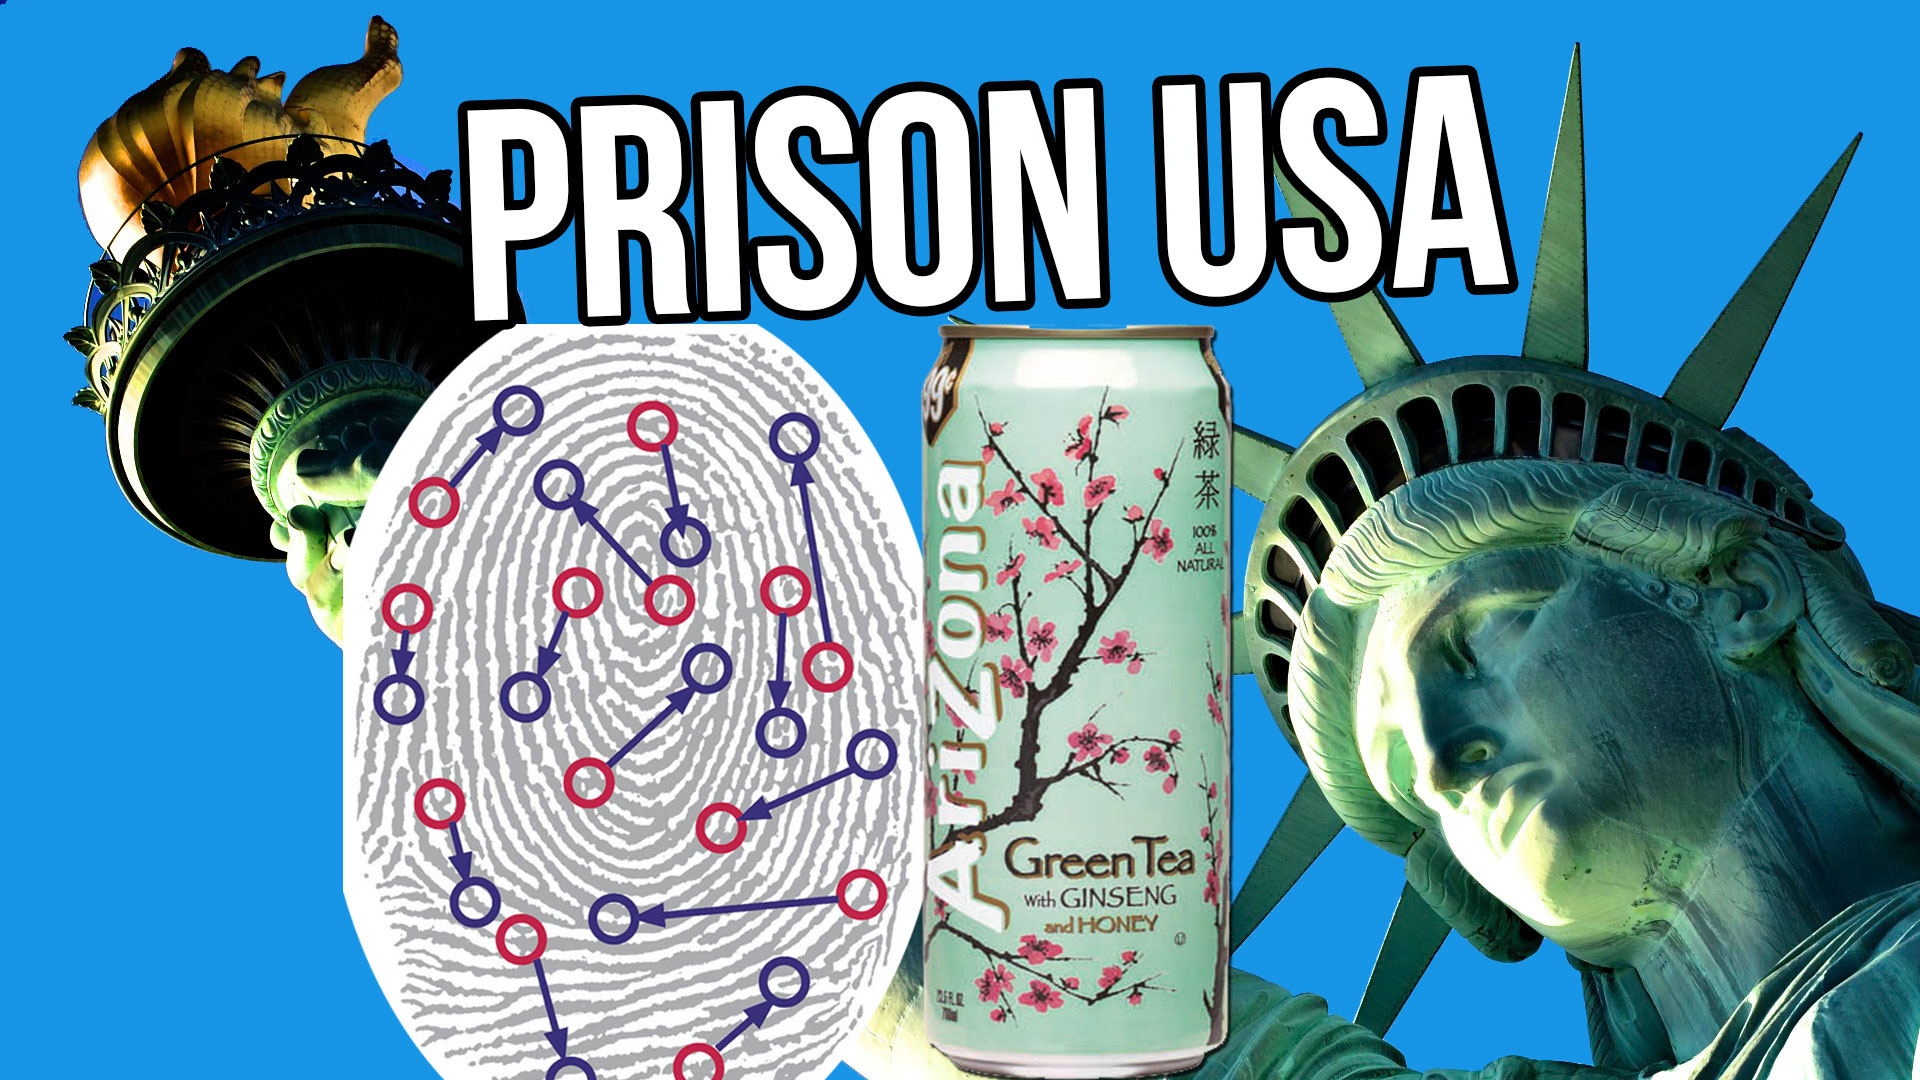 Is Government Turning the World Into A Prison